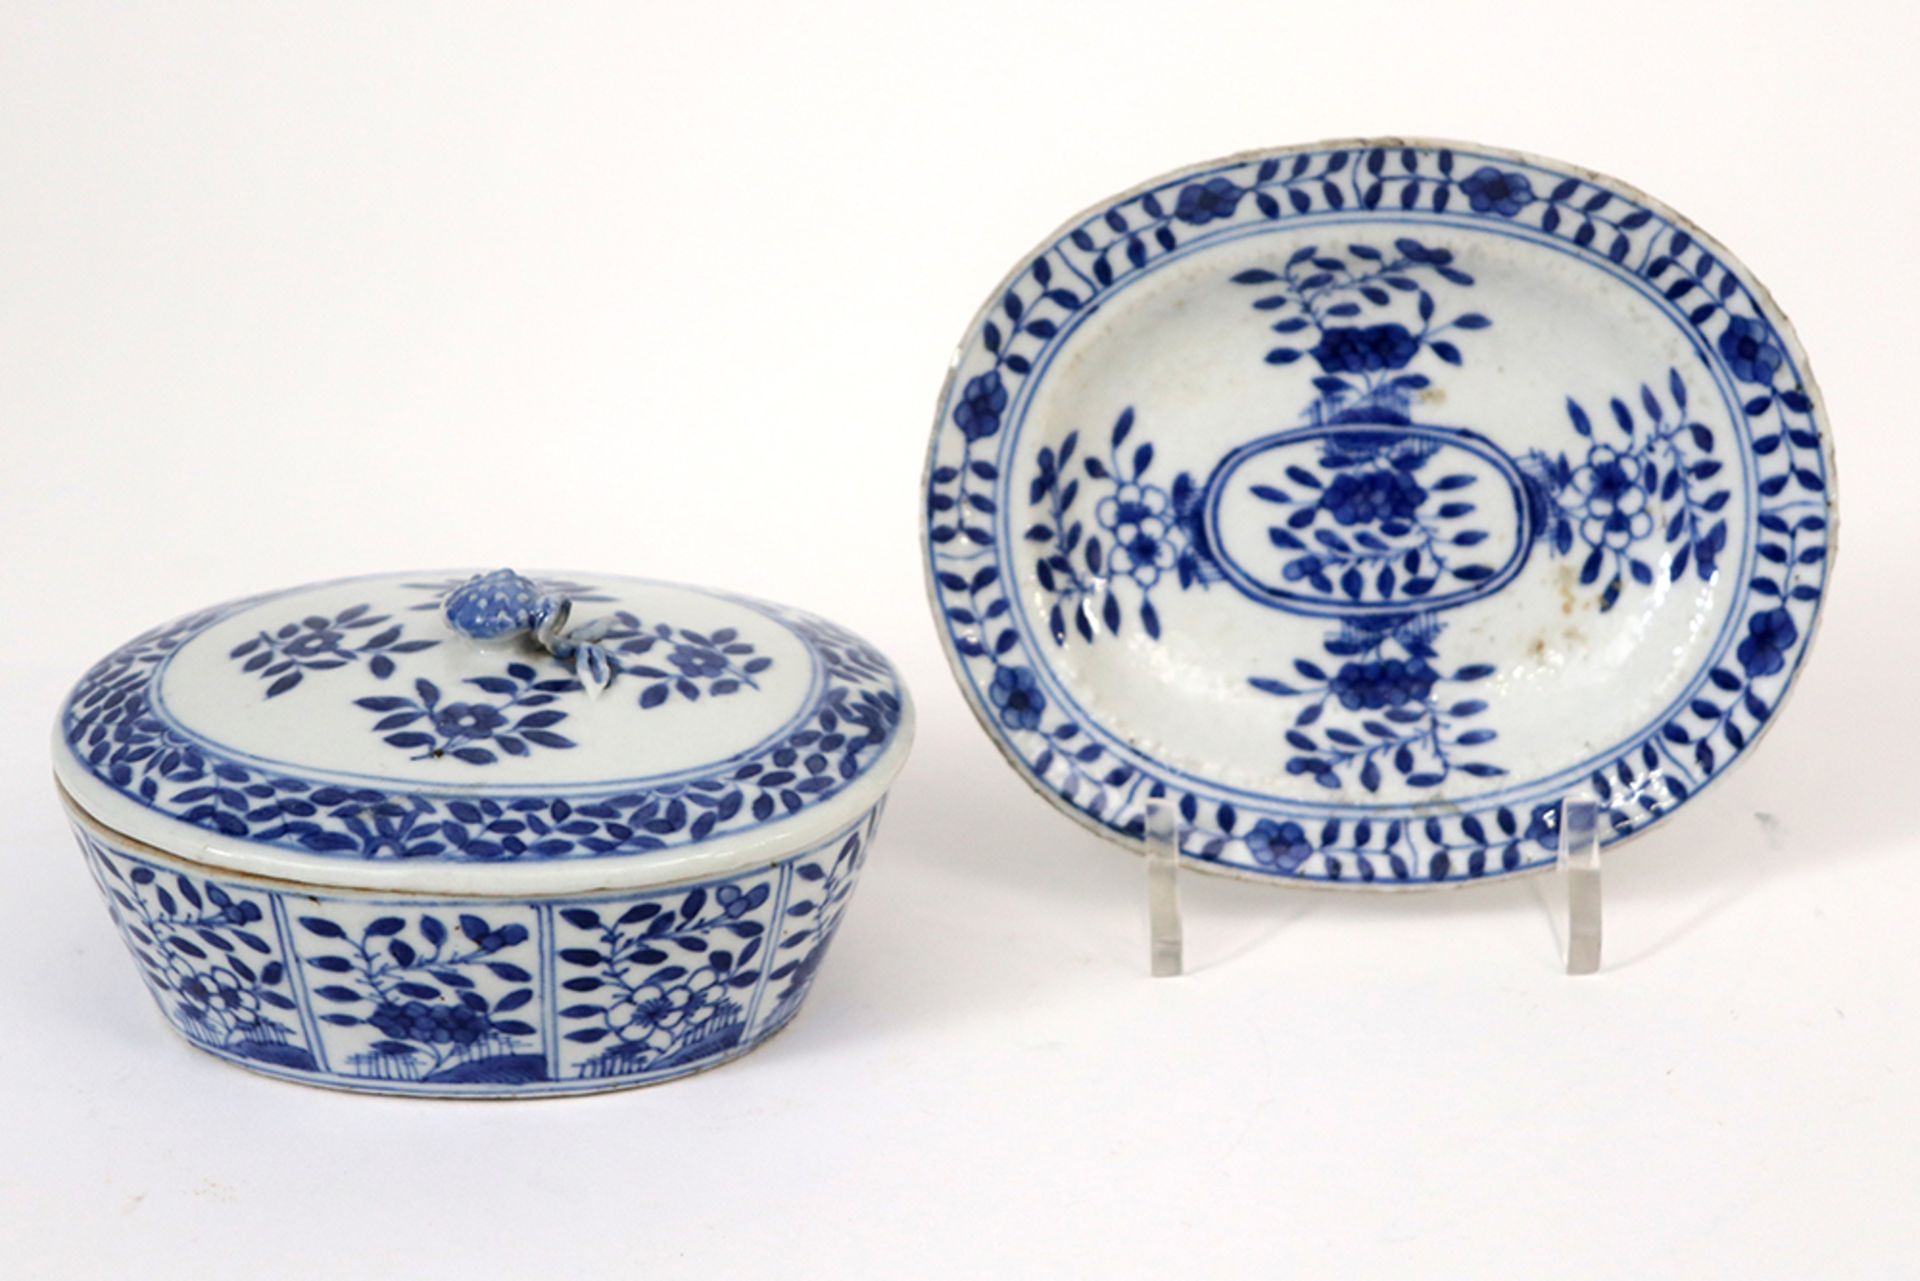 18th Cent. Chinese set of small lidded tureen and its dish in porcelain with a blue-white flowers